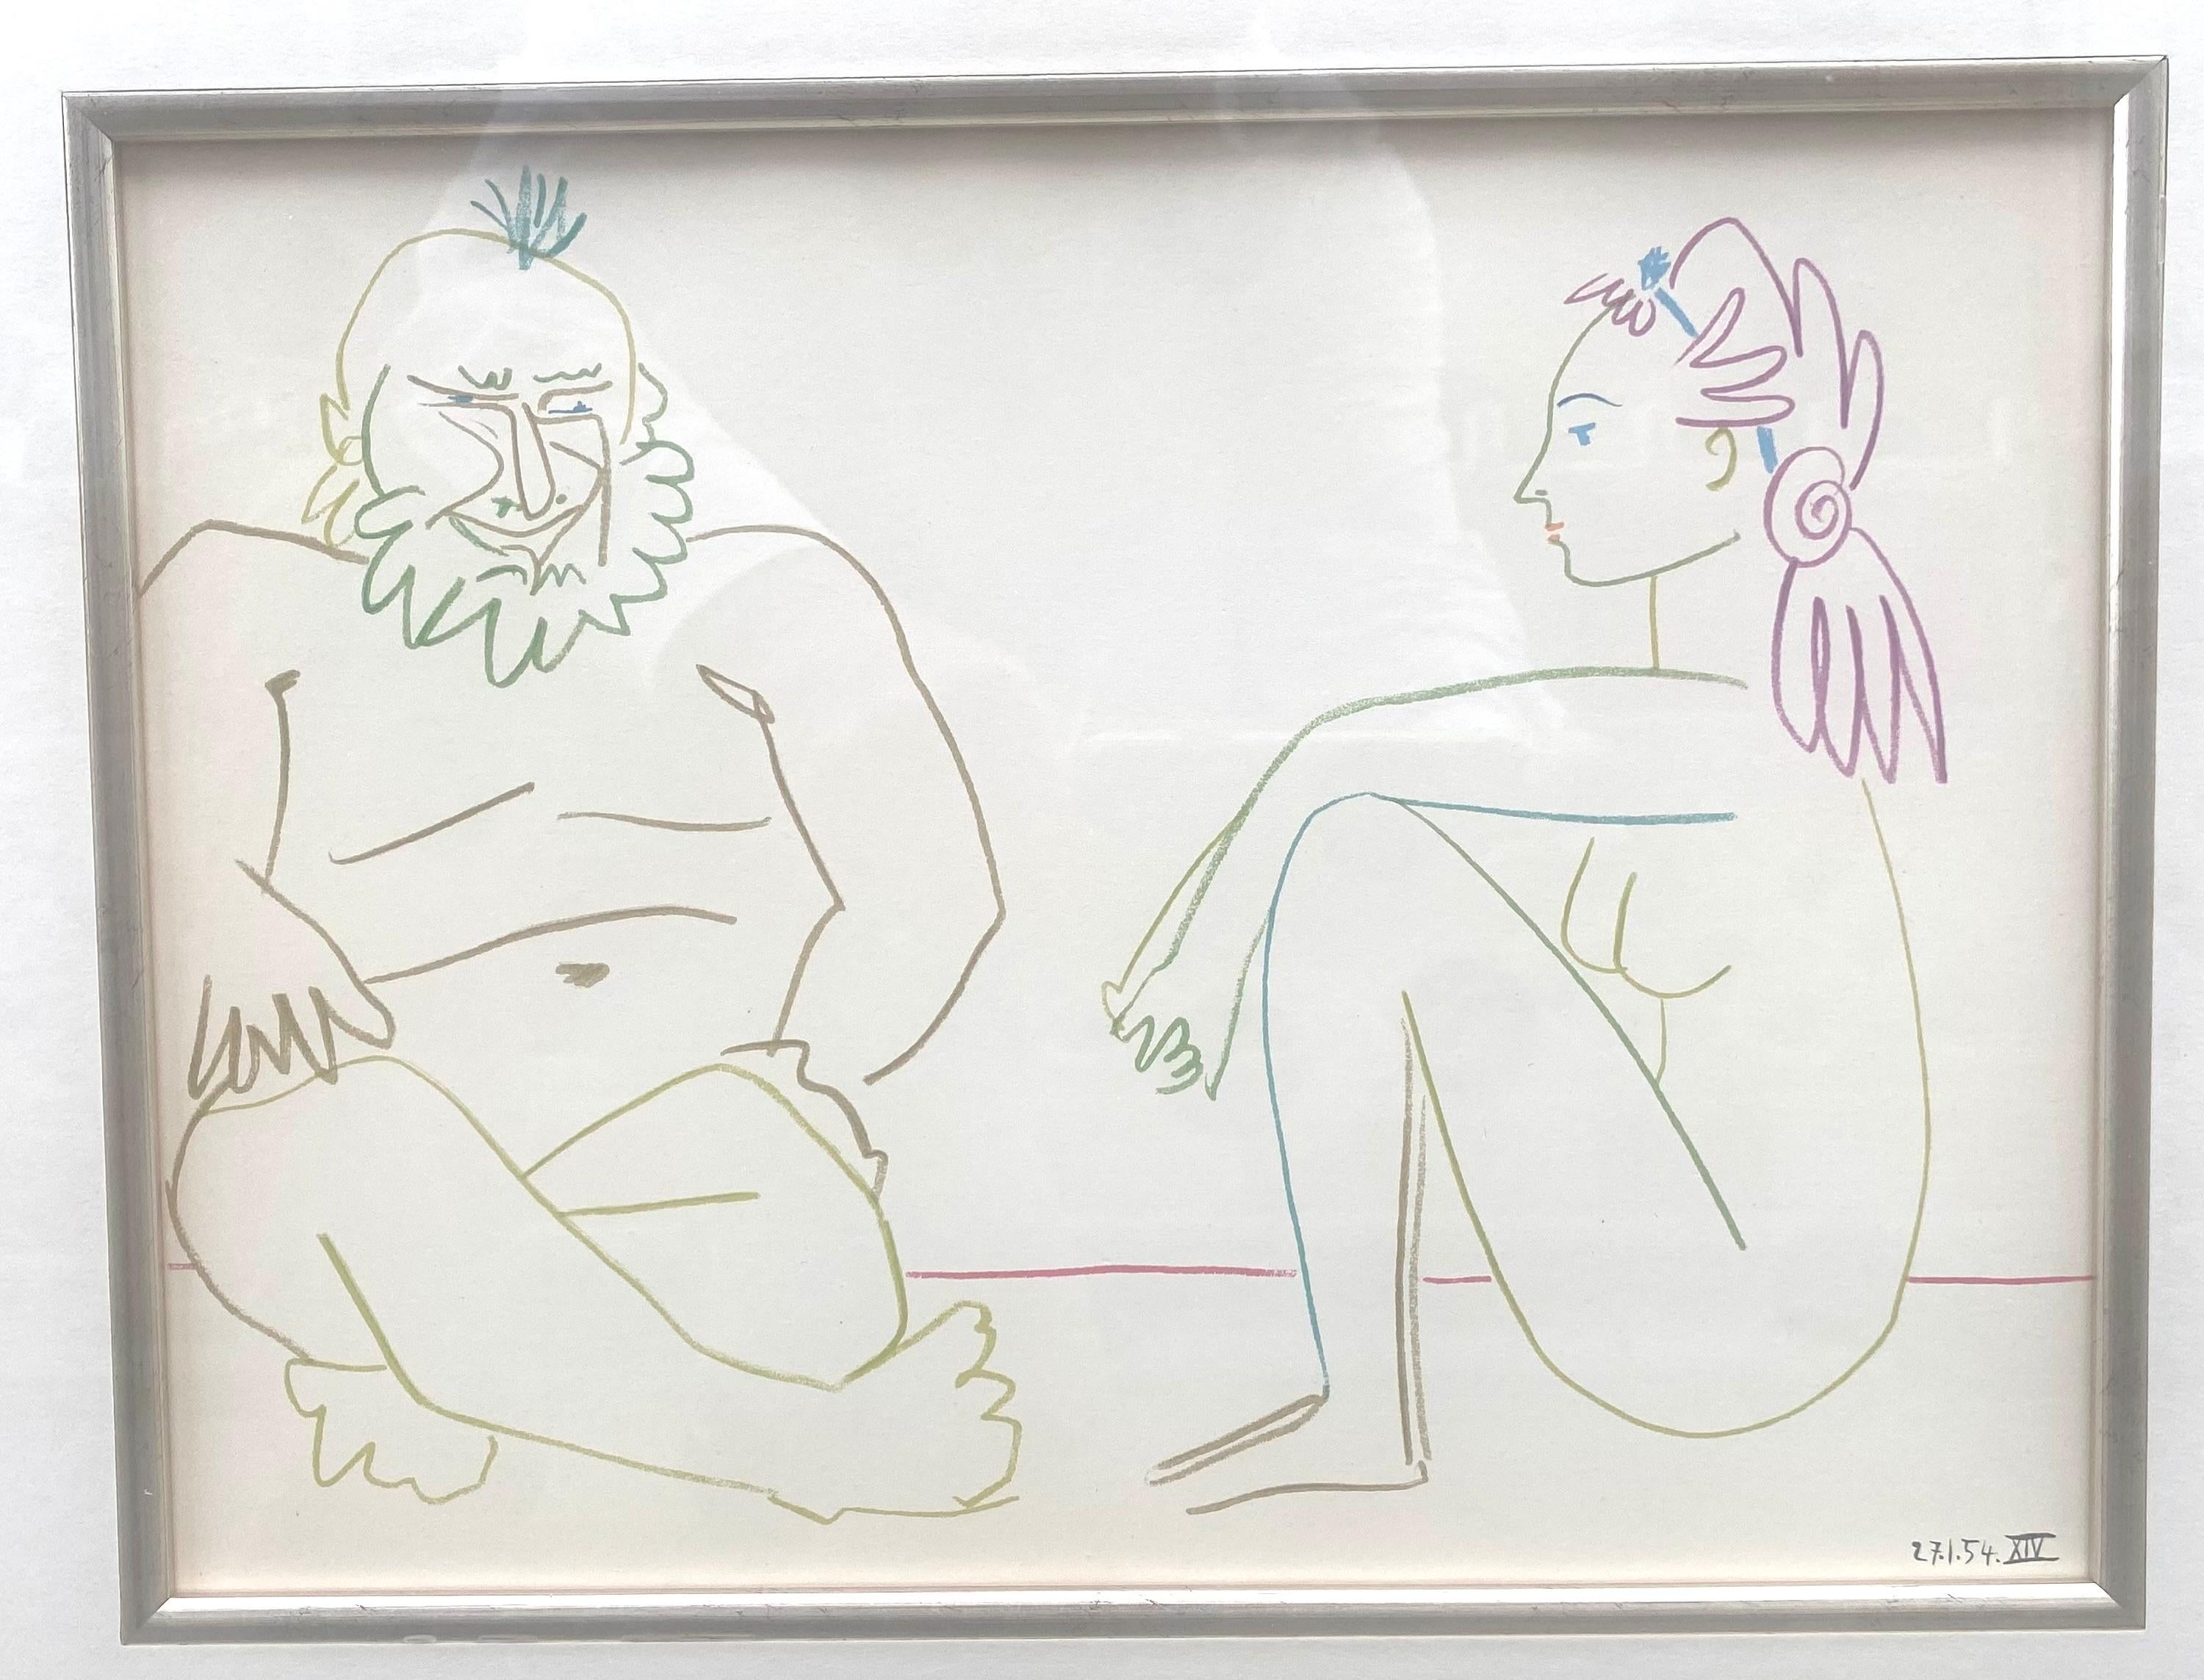 "Figure with Female Nude" is an oroginal lithograph taken from Picasso's Verve 29/30 series in 1954. It is printed by Mourlot in Paris, not signed, but from the same lithographic stone.  Dated. Limited edition 75. It comes beautifully framed with a